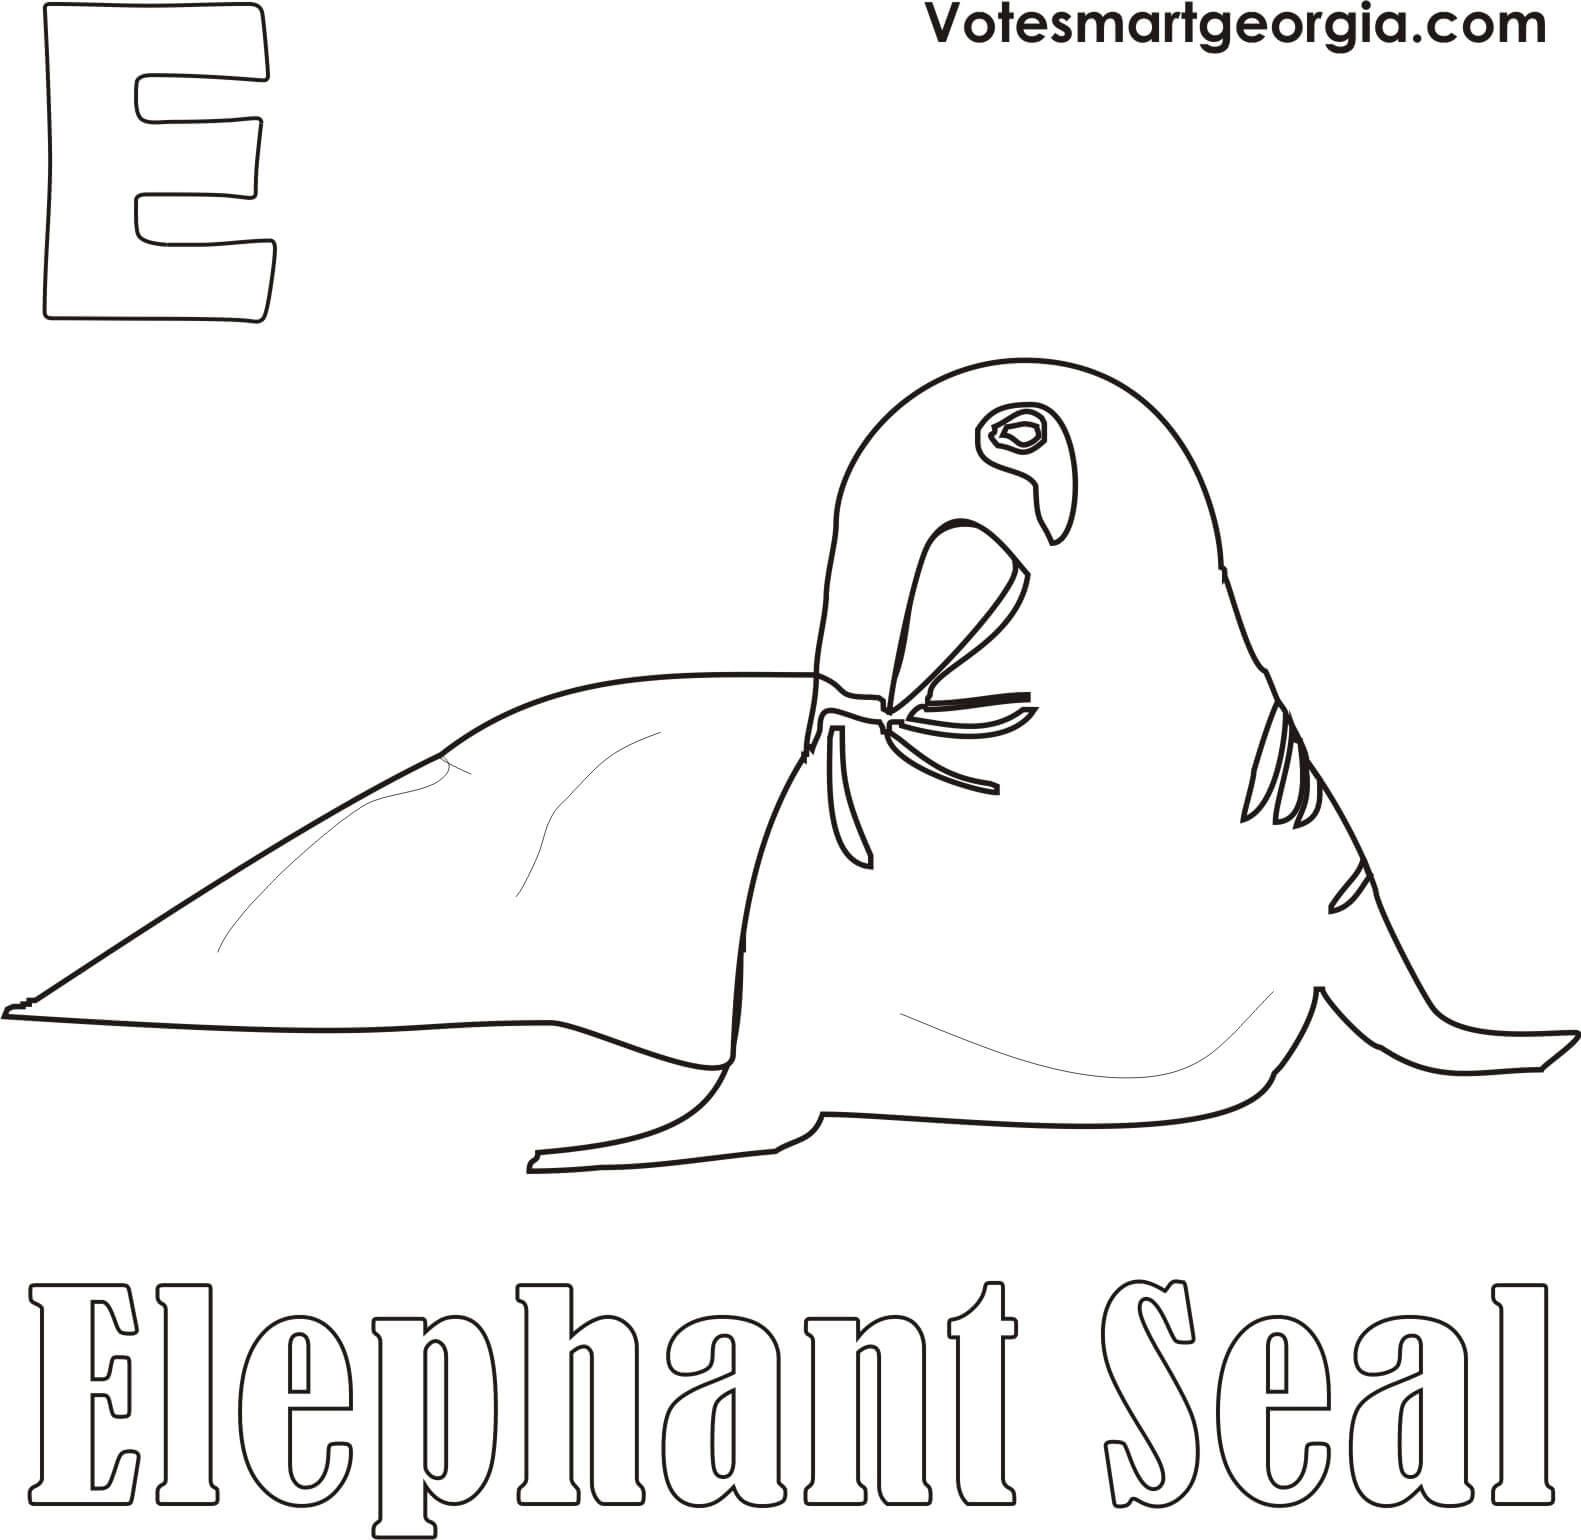 Elephant Seal Coloring Page free